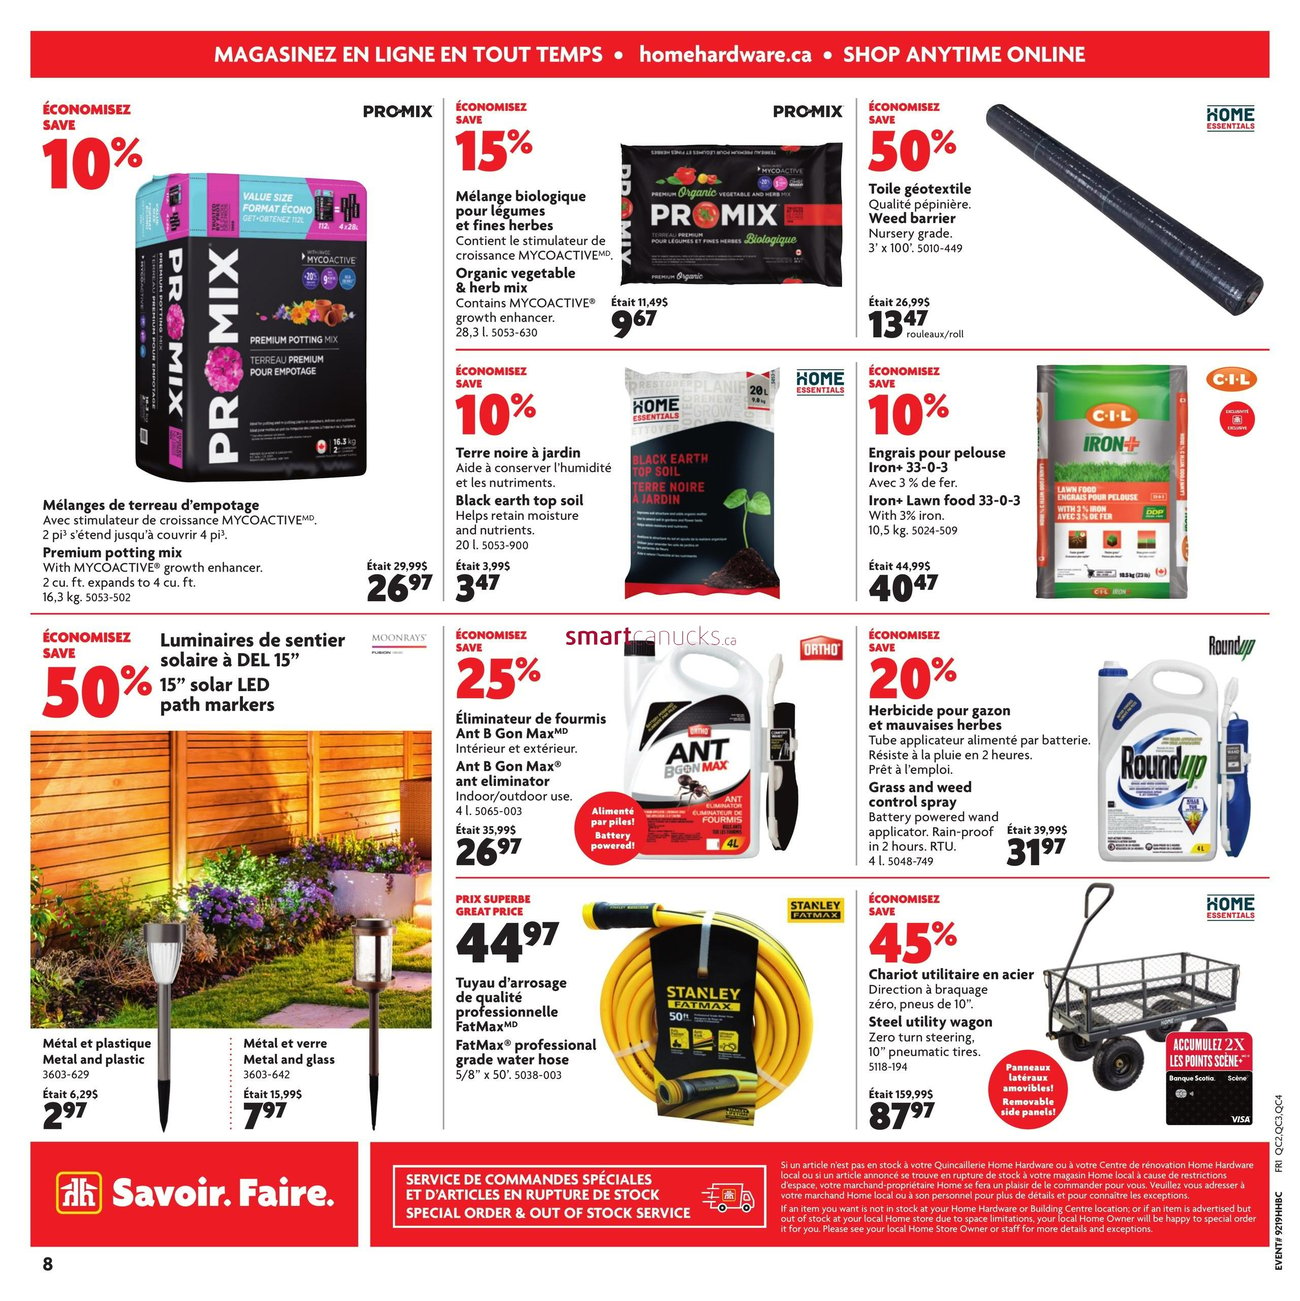 Home Hardware Building Centre - Quebec - 2 Weeks of Savings - Page 10